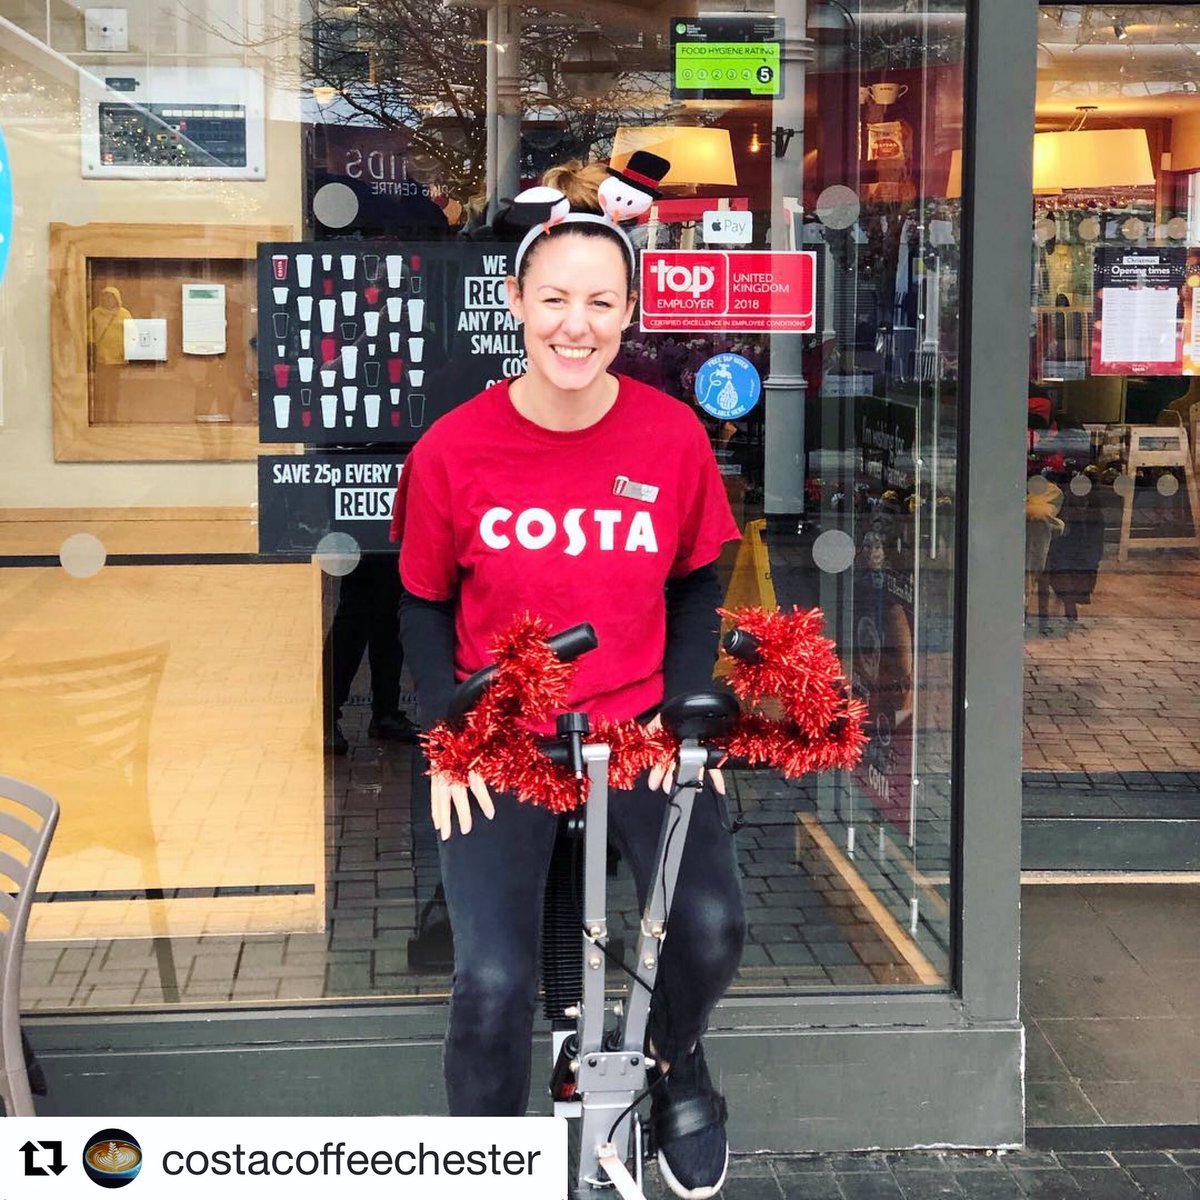 We really do love a static bike fundraiser! Well done to Sarah and the team at Costa Coffee Chester for their epic 100 mile cycle 🚲 👏🏻 ・・・ And she’s off! 100 miles for the costa foundation! Easy 💪🏽 #costafoundation